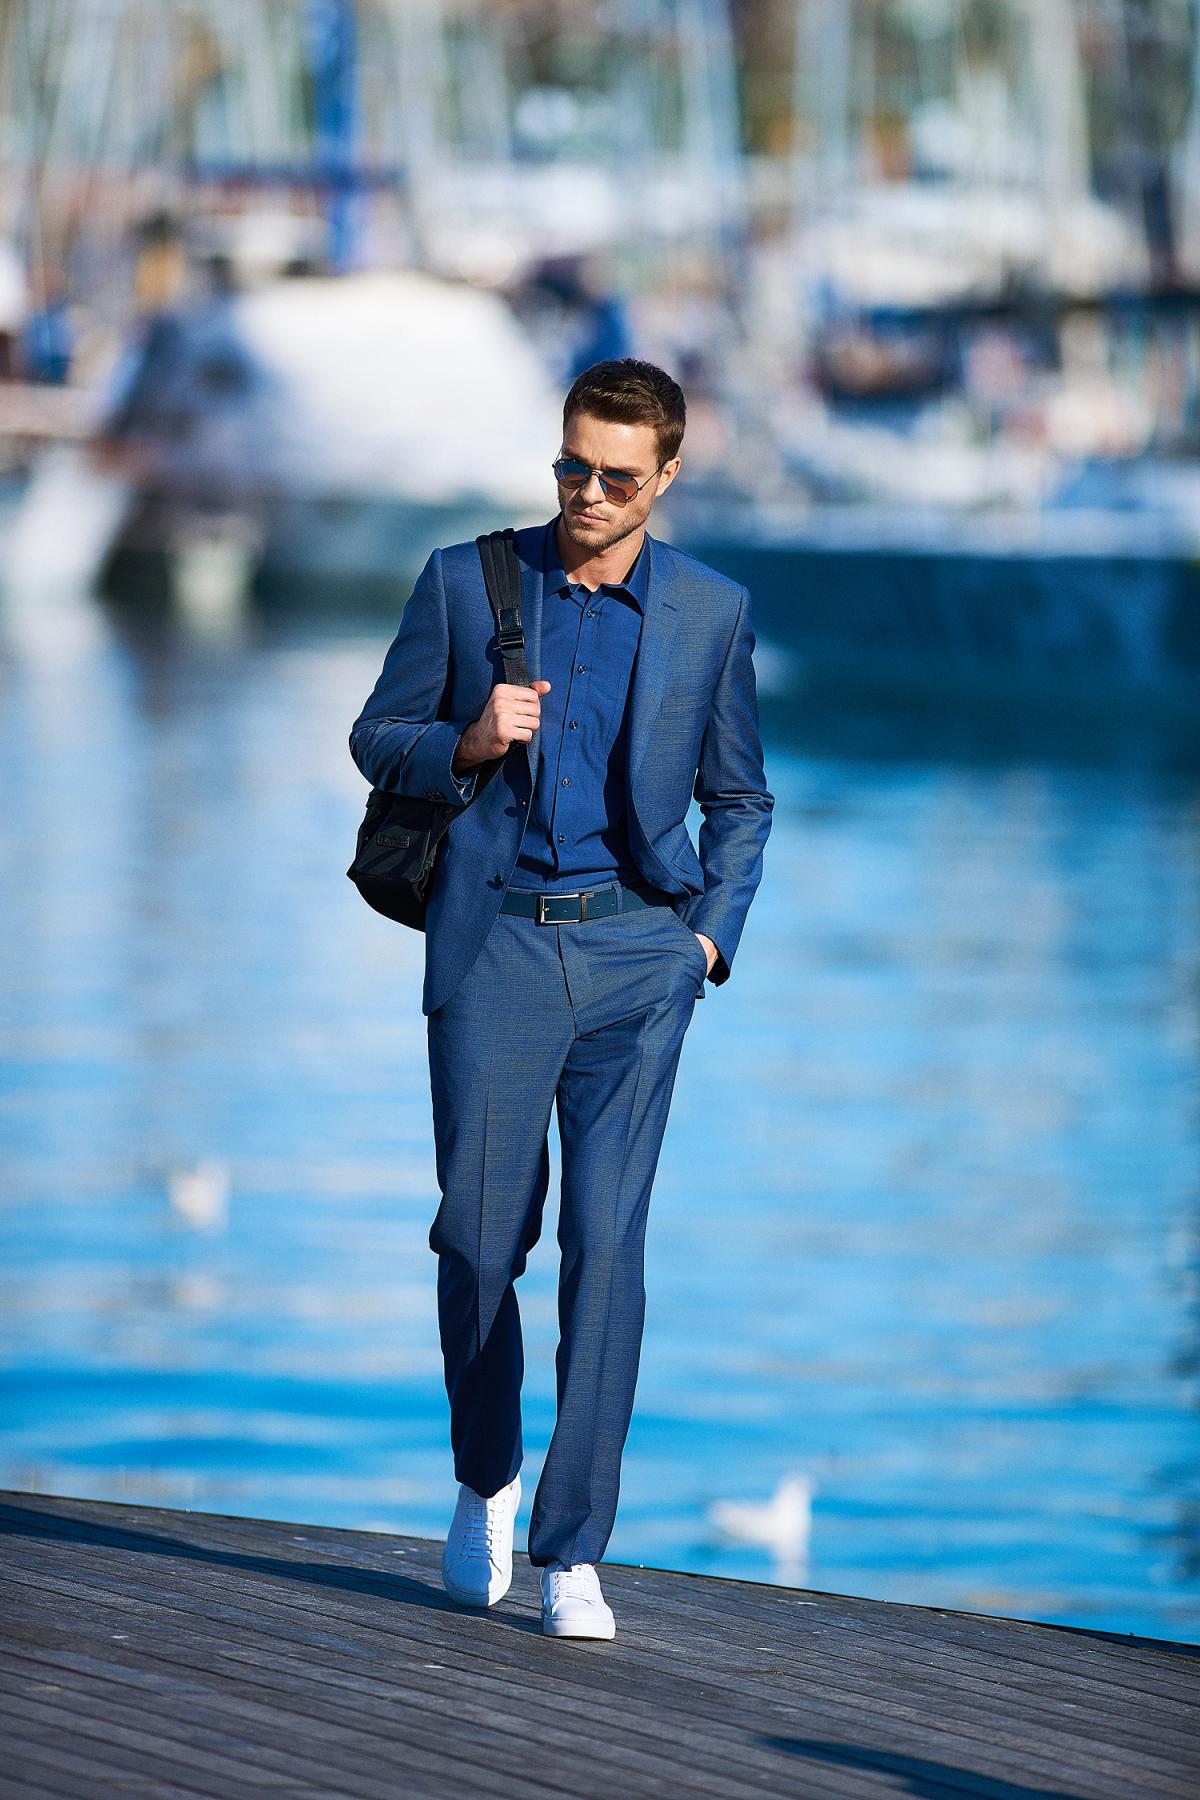 A detailed guide on the selection of casual and business style for the coming spring